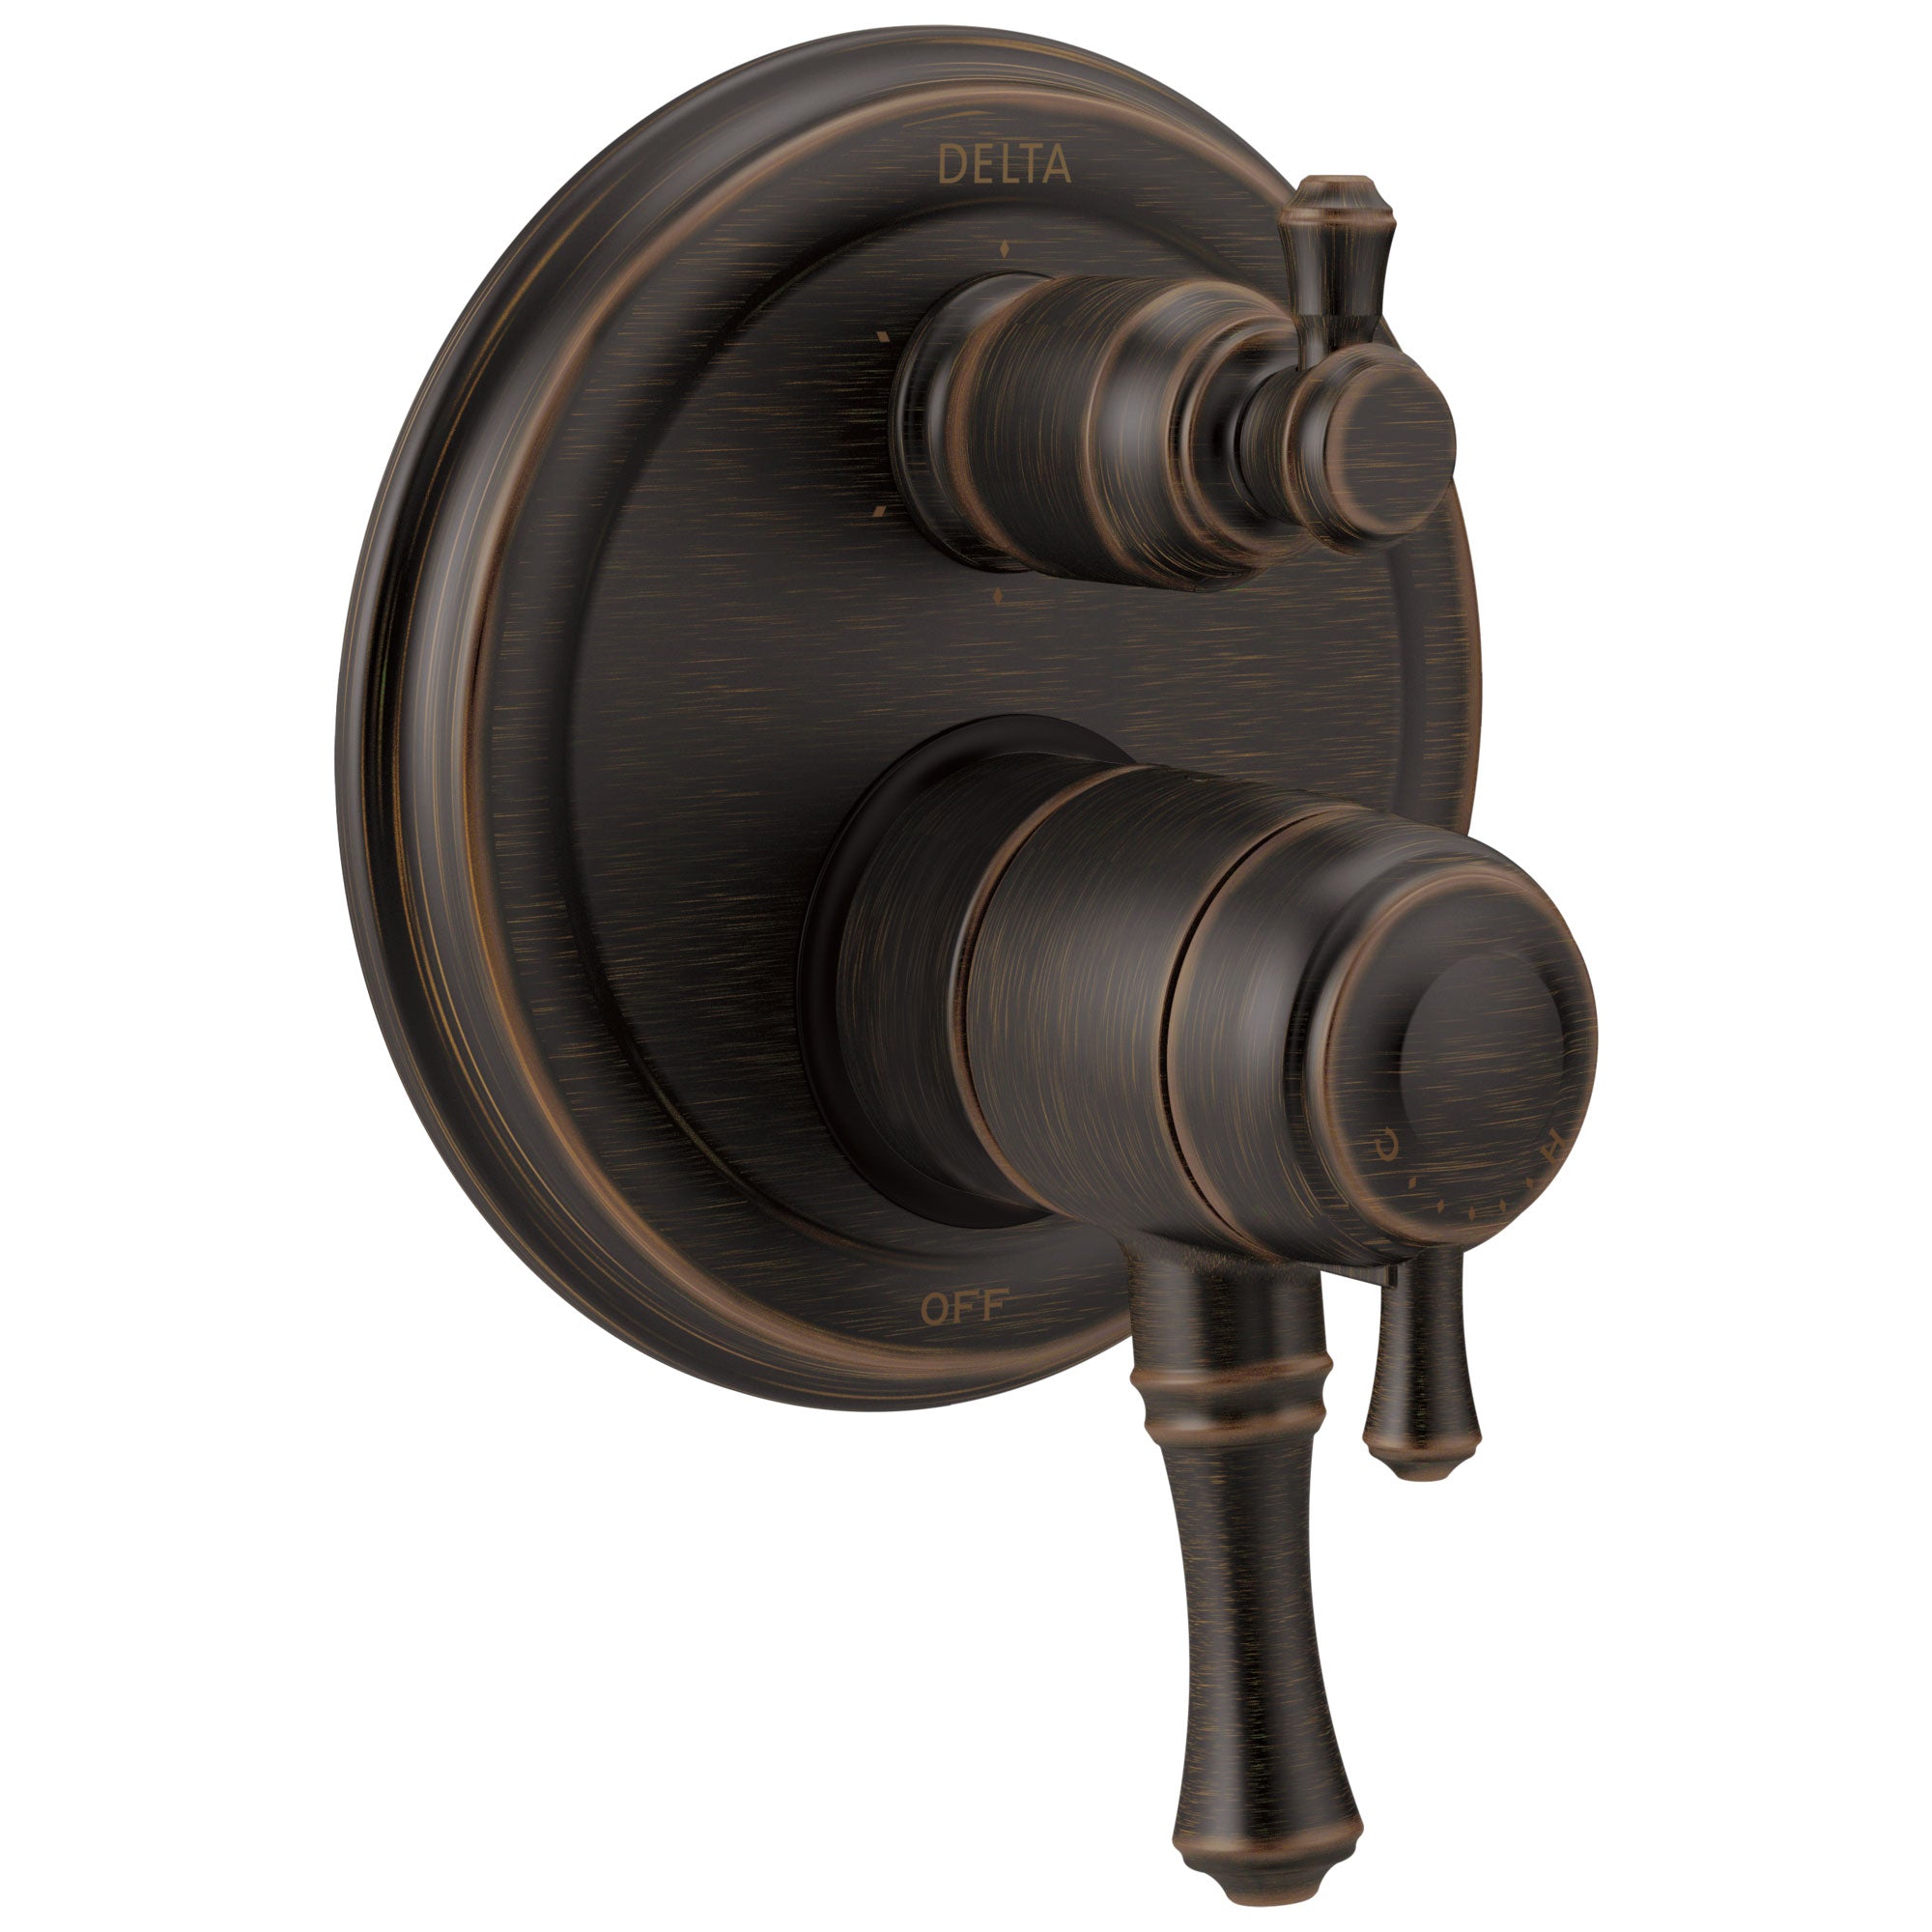 Delta Cassidy Collection Venetian Bronze Traditional Shower Faucet Control Handle with 6-Setting Integrated Diverter Trim (Requires Valve) DT27997RB